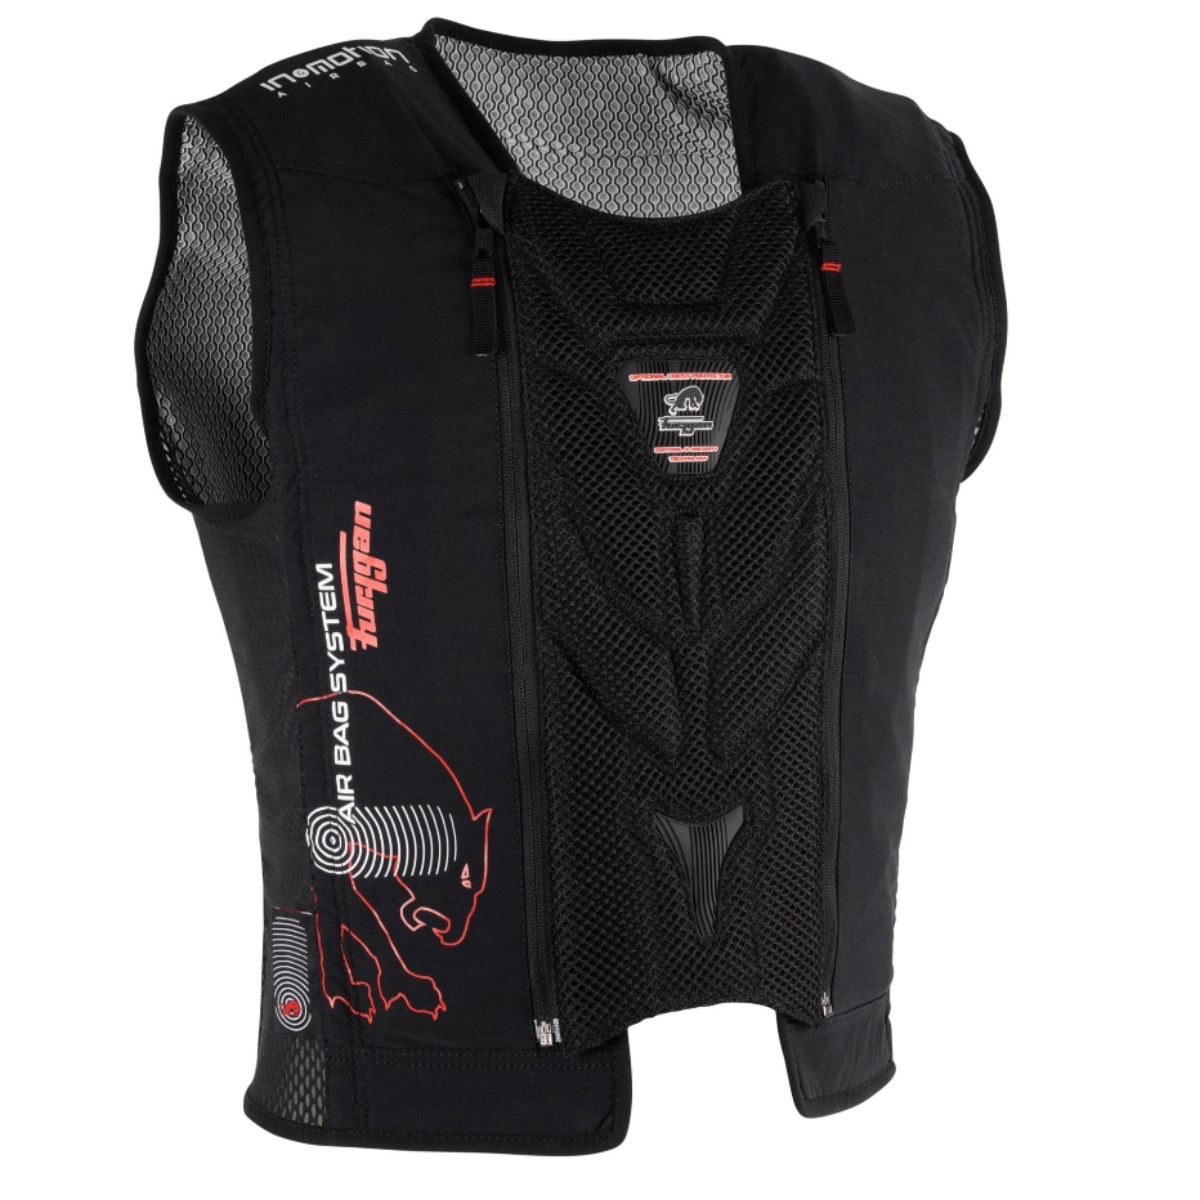 Air Bag Armor - Inflatable protective motorcycle vest